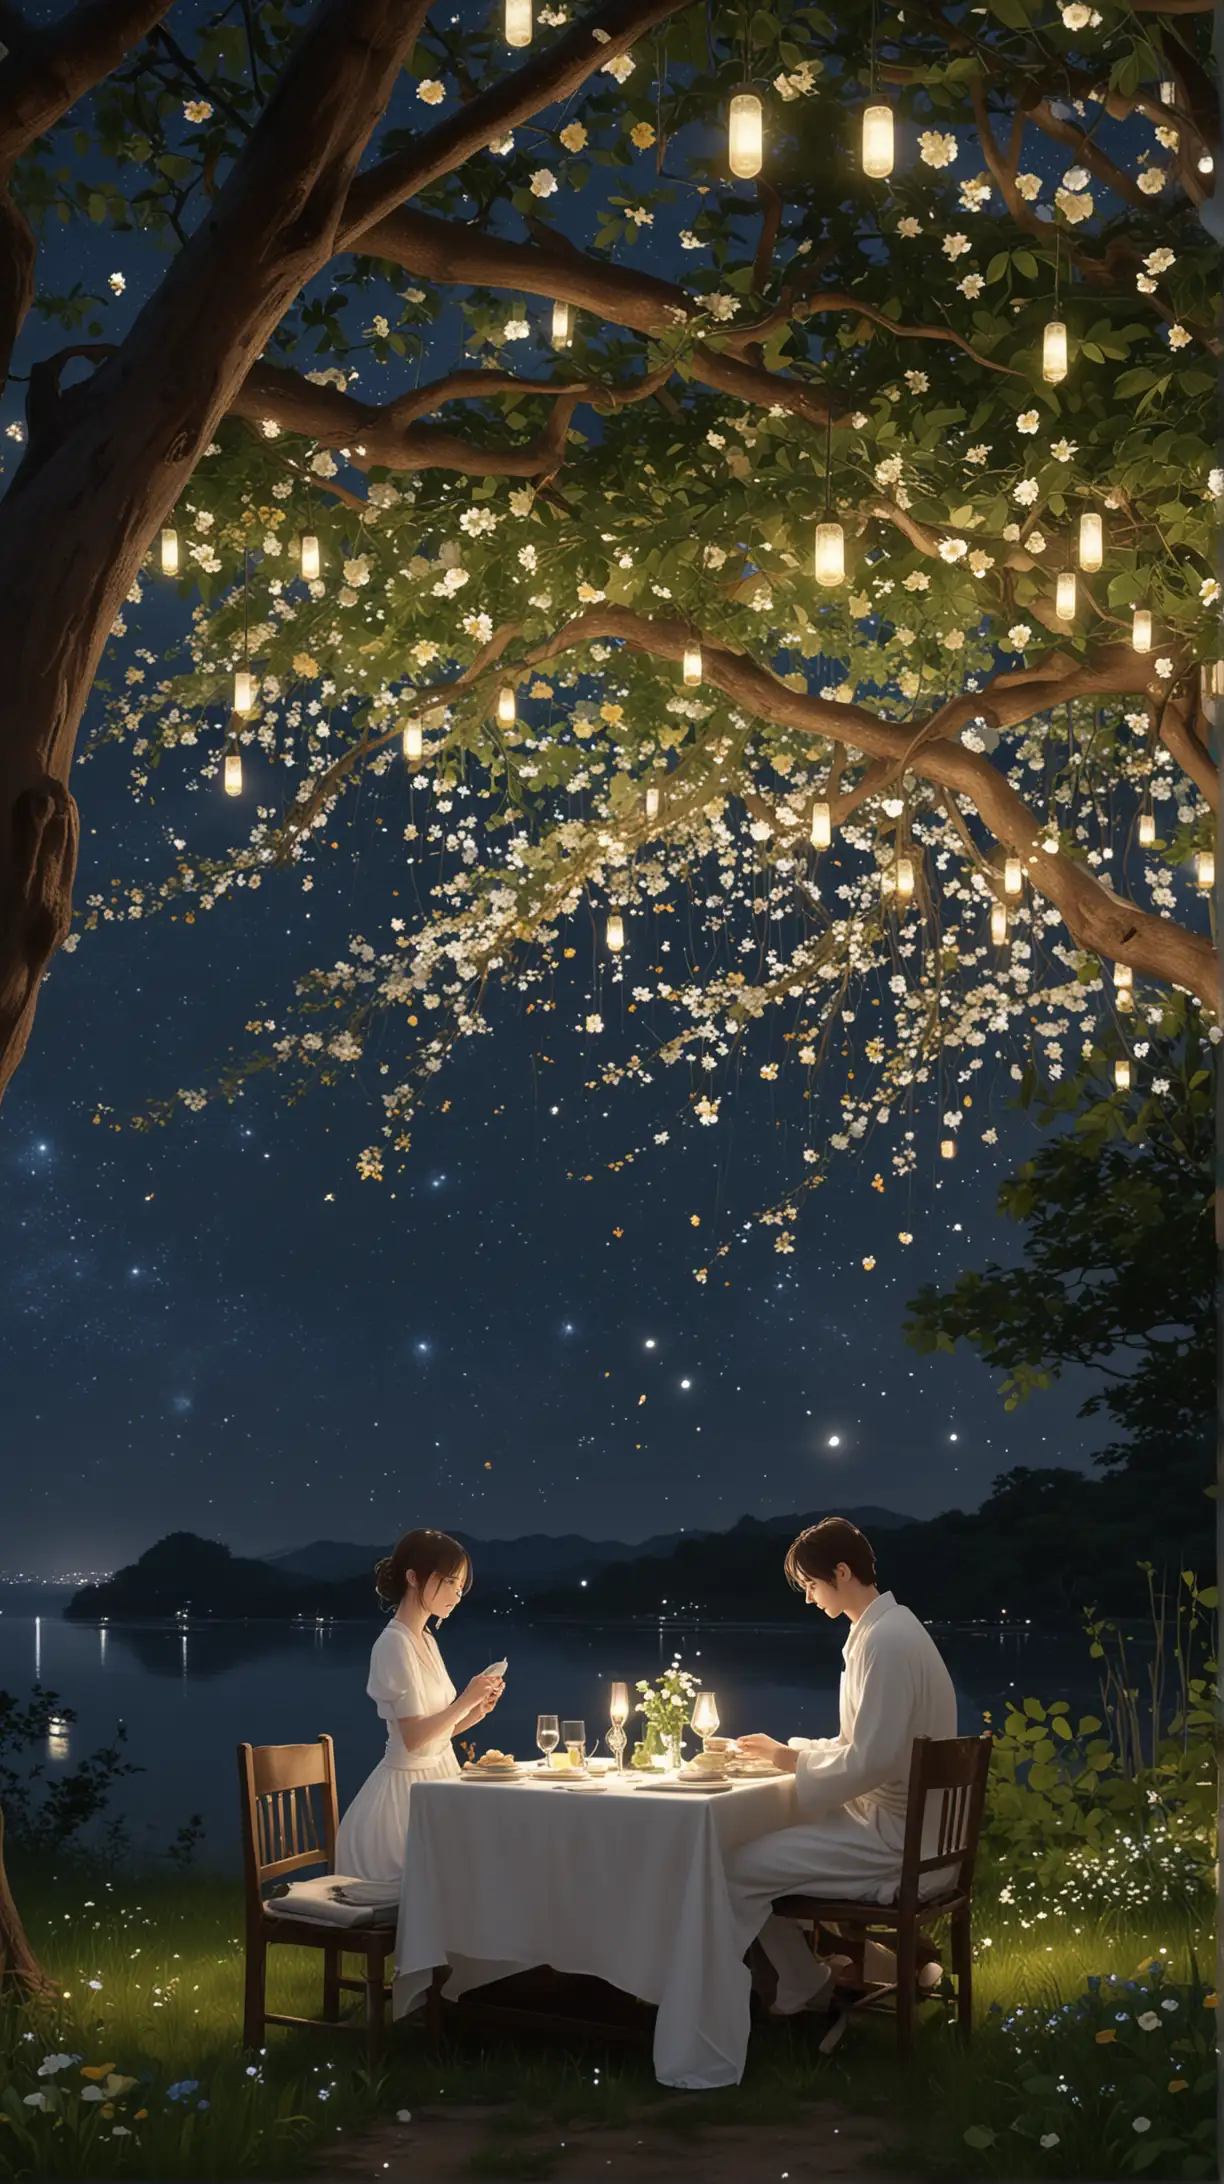 one girl wearing white gown dress, one boy sitting by  lux dinner set table under a tree, flickering lamp,  hanging lamps, fireflies on sky, under beautiful starry dark night sky, beaitiful variant flowers surrounding them, render, stable diffusion, acrylic palette knife, realistic, ultra detailed, illustration, makoto shinkai, mystica_meta, codex_401, --ar mj v 6.0, vibrant, majestic, trending pixiv fanbox, UHD, ultra detailed.